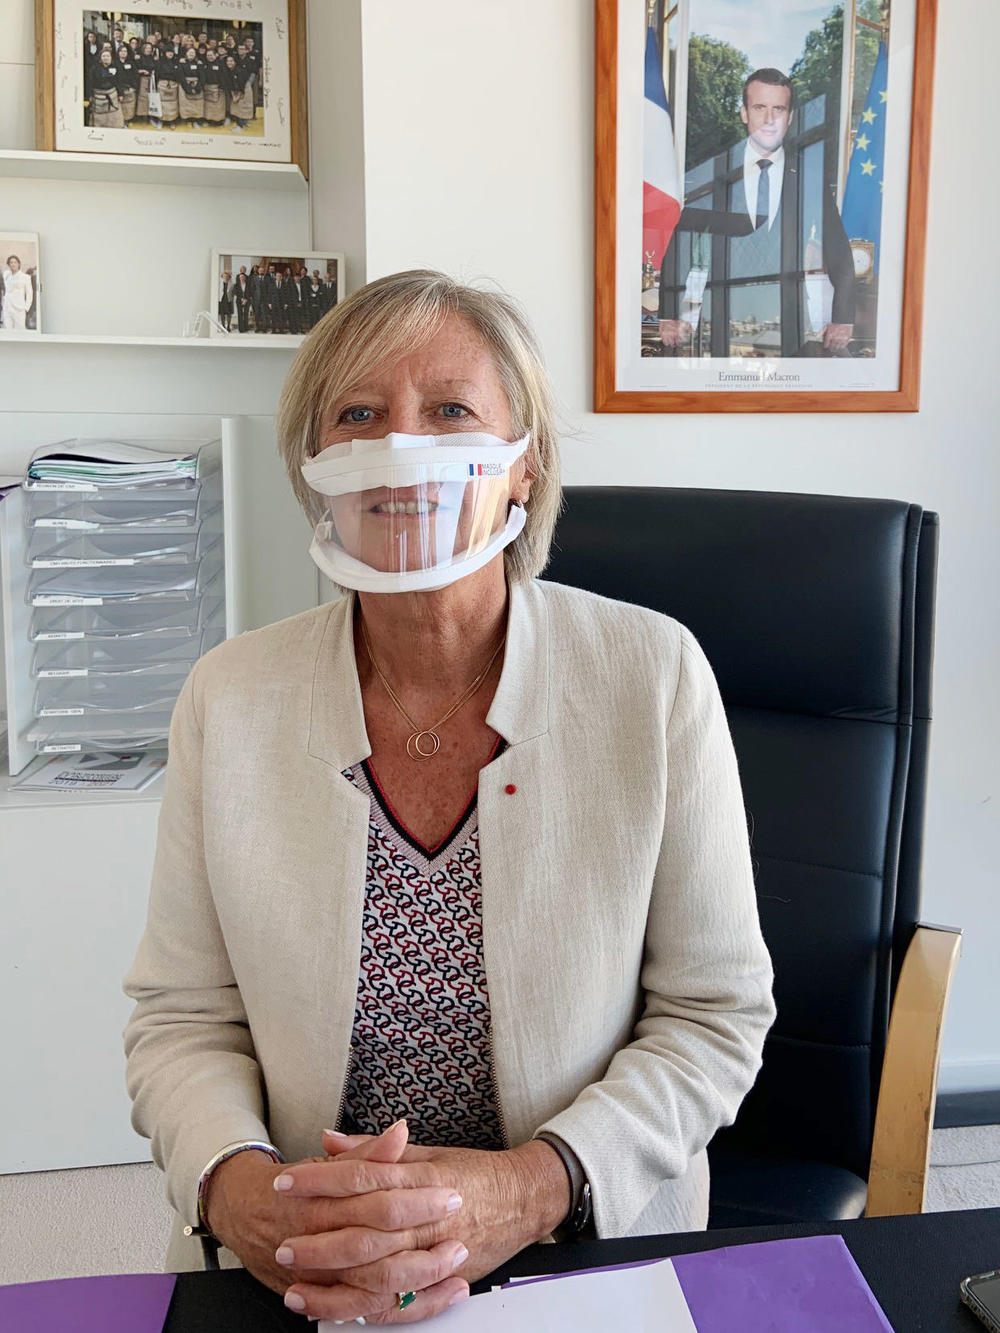 Sophie Cluzel, France's secretary of state in charge of disability issues, demonstrates a transparent mask in her office.